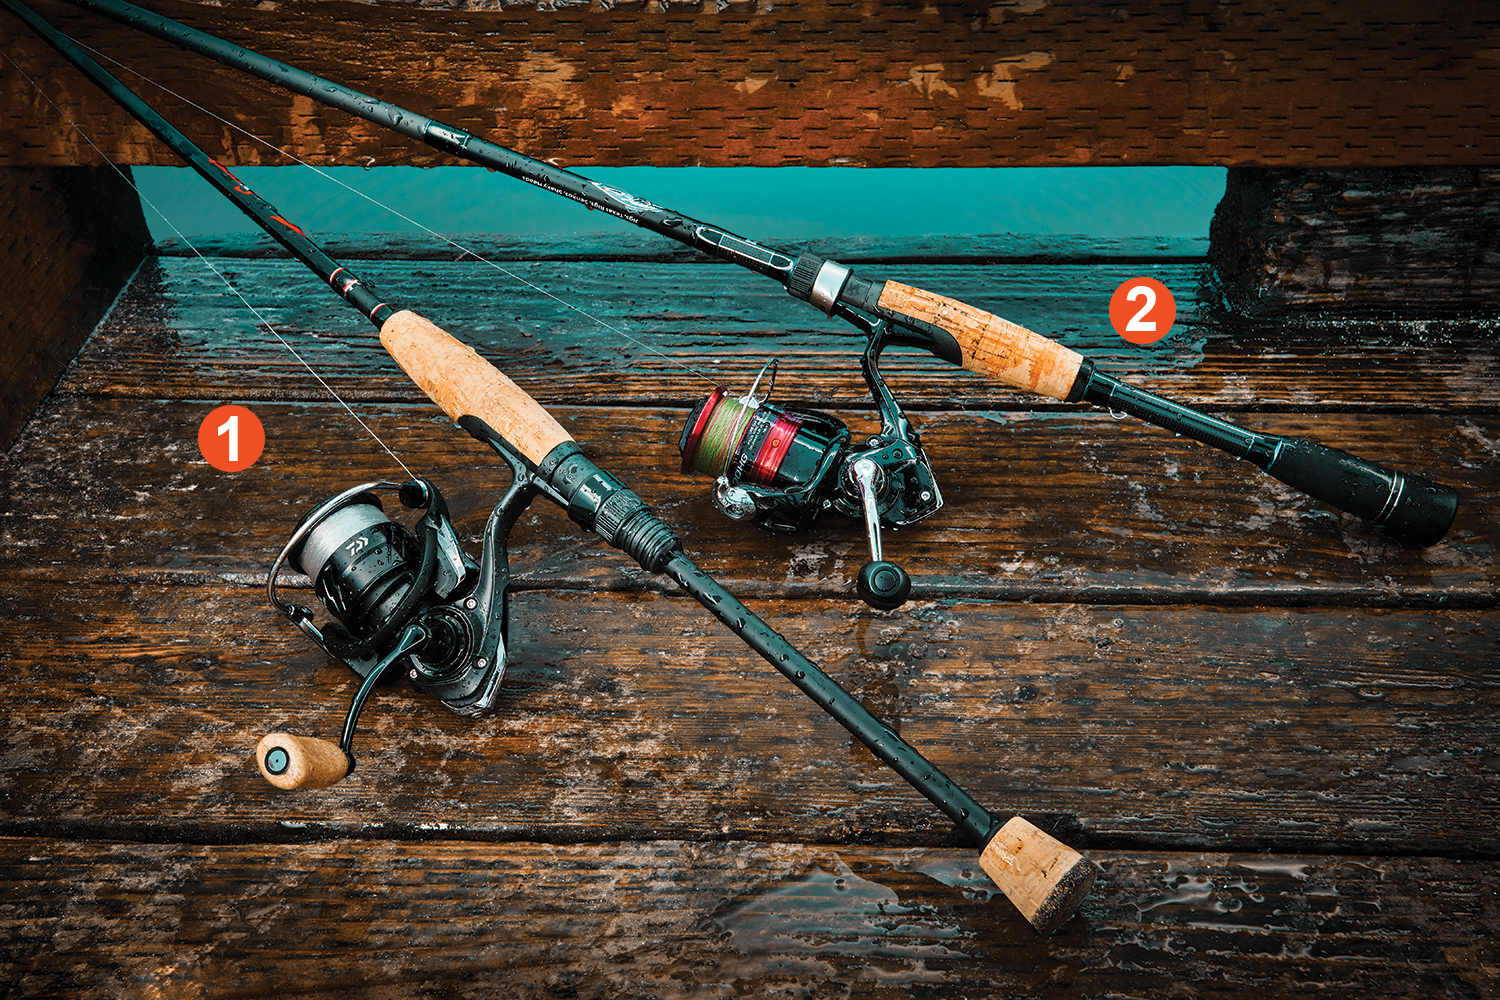 Spinning rod and reel combos on a deck.